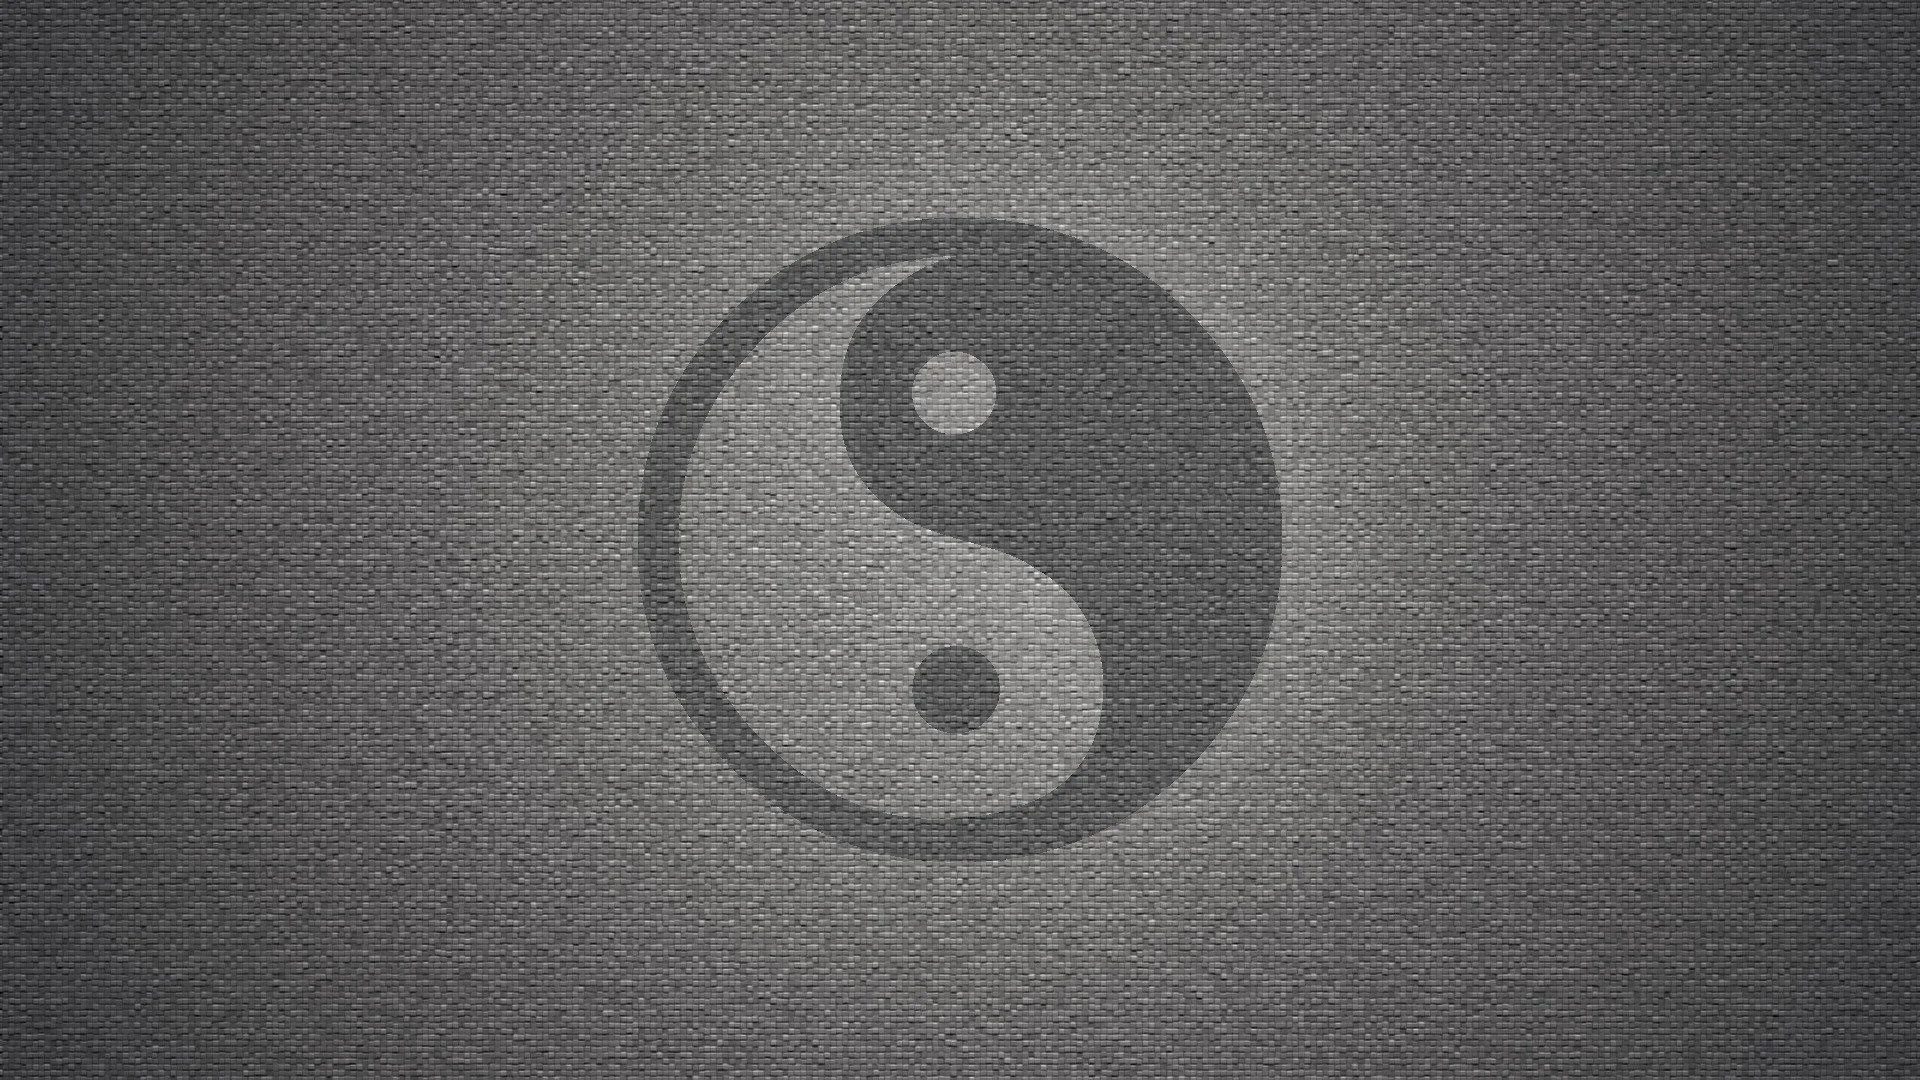 Wall yin yang symbol textures grayscale backgrounds symbols wallpaper 288519 WallpaperUP